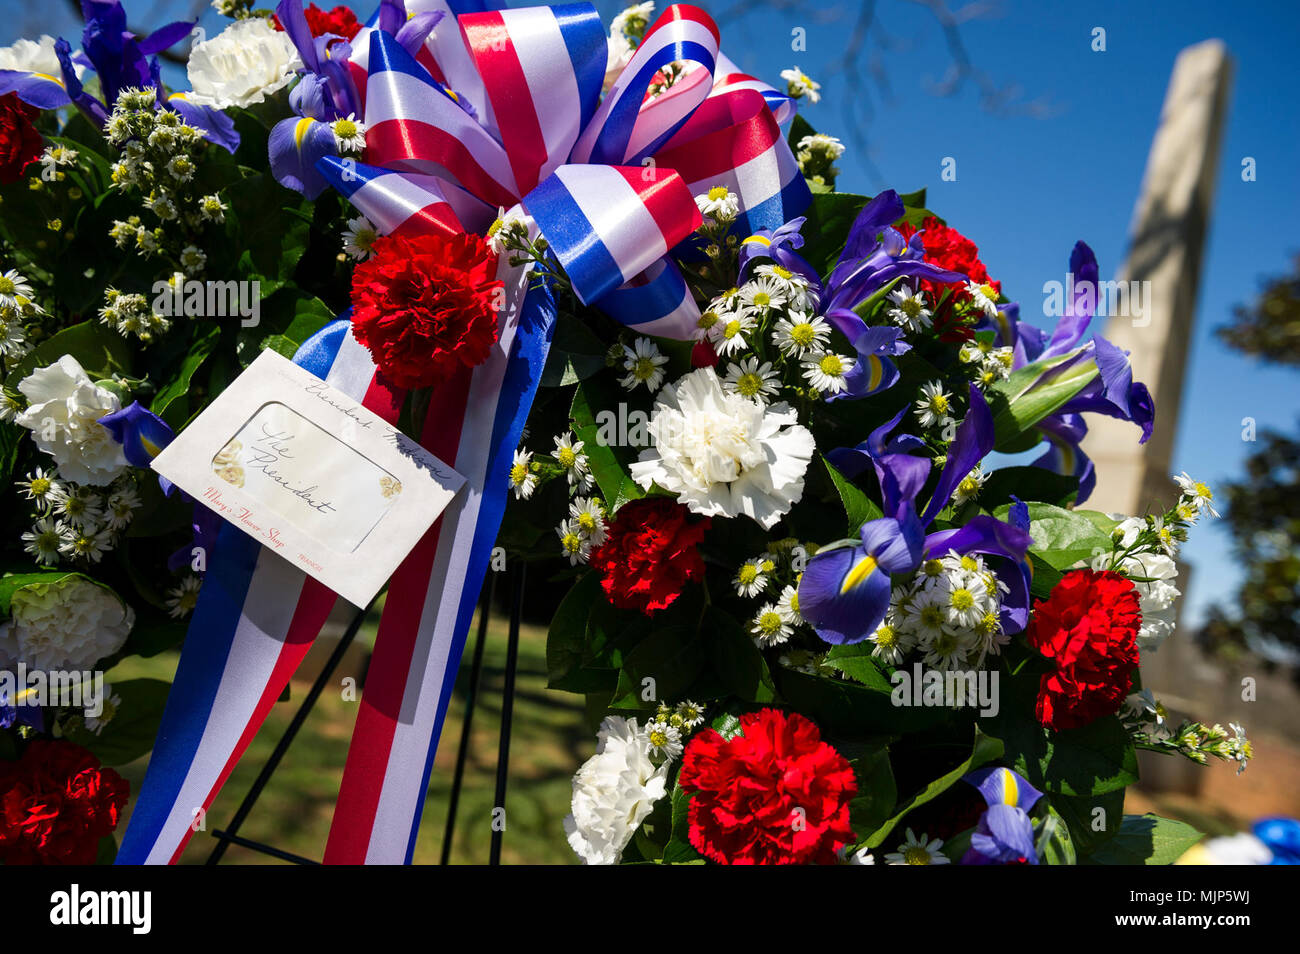 The Presidential wreath provided by President Donald J. Trump, is displayed during the wreath laying ceremony held in honor of the 4th President of the United States, James Madison, also known as the Father of the Constitution, at his home at Montpelier, Orange, Va., March 16, 2018. This event was held in commemoration of the 267th anniversary of the birth of Madison, born in 1751, and has also been decreed as James Madison Appreciation Day for the Commonwealth of Virginia. Armed Forces and civilians displaying courage bravery dedication commitment and sacrifice Stock Photo